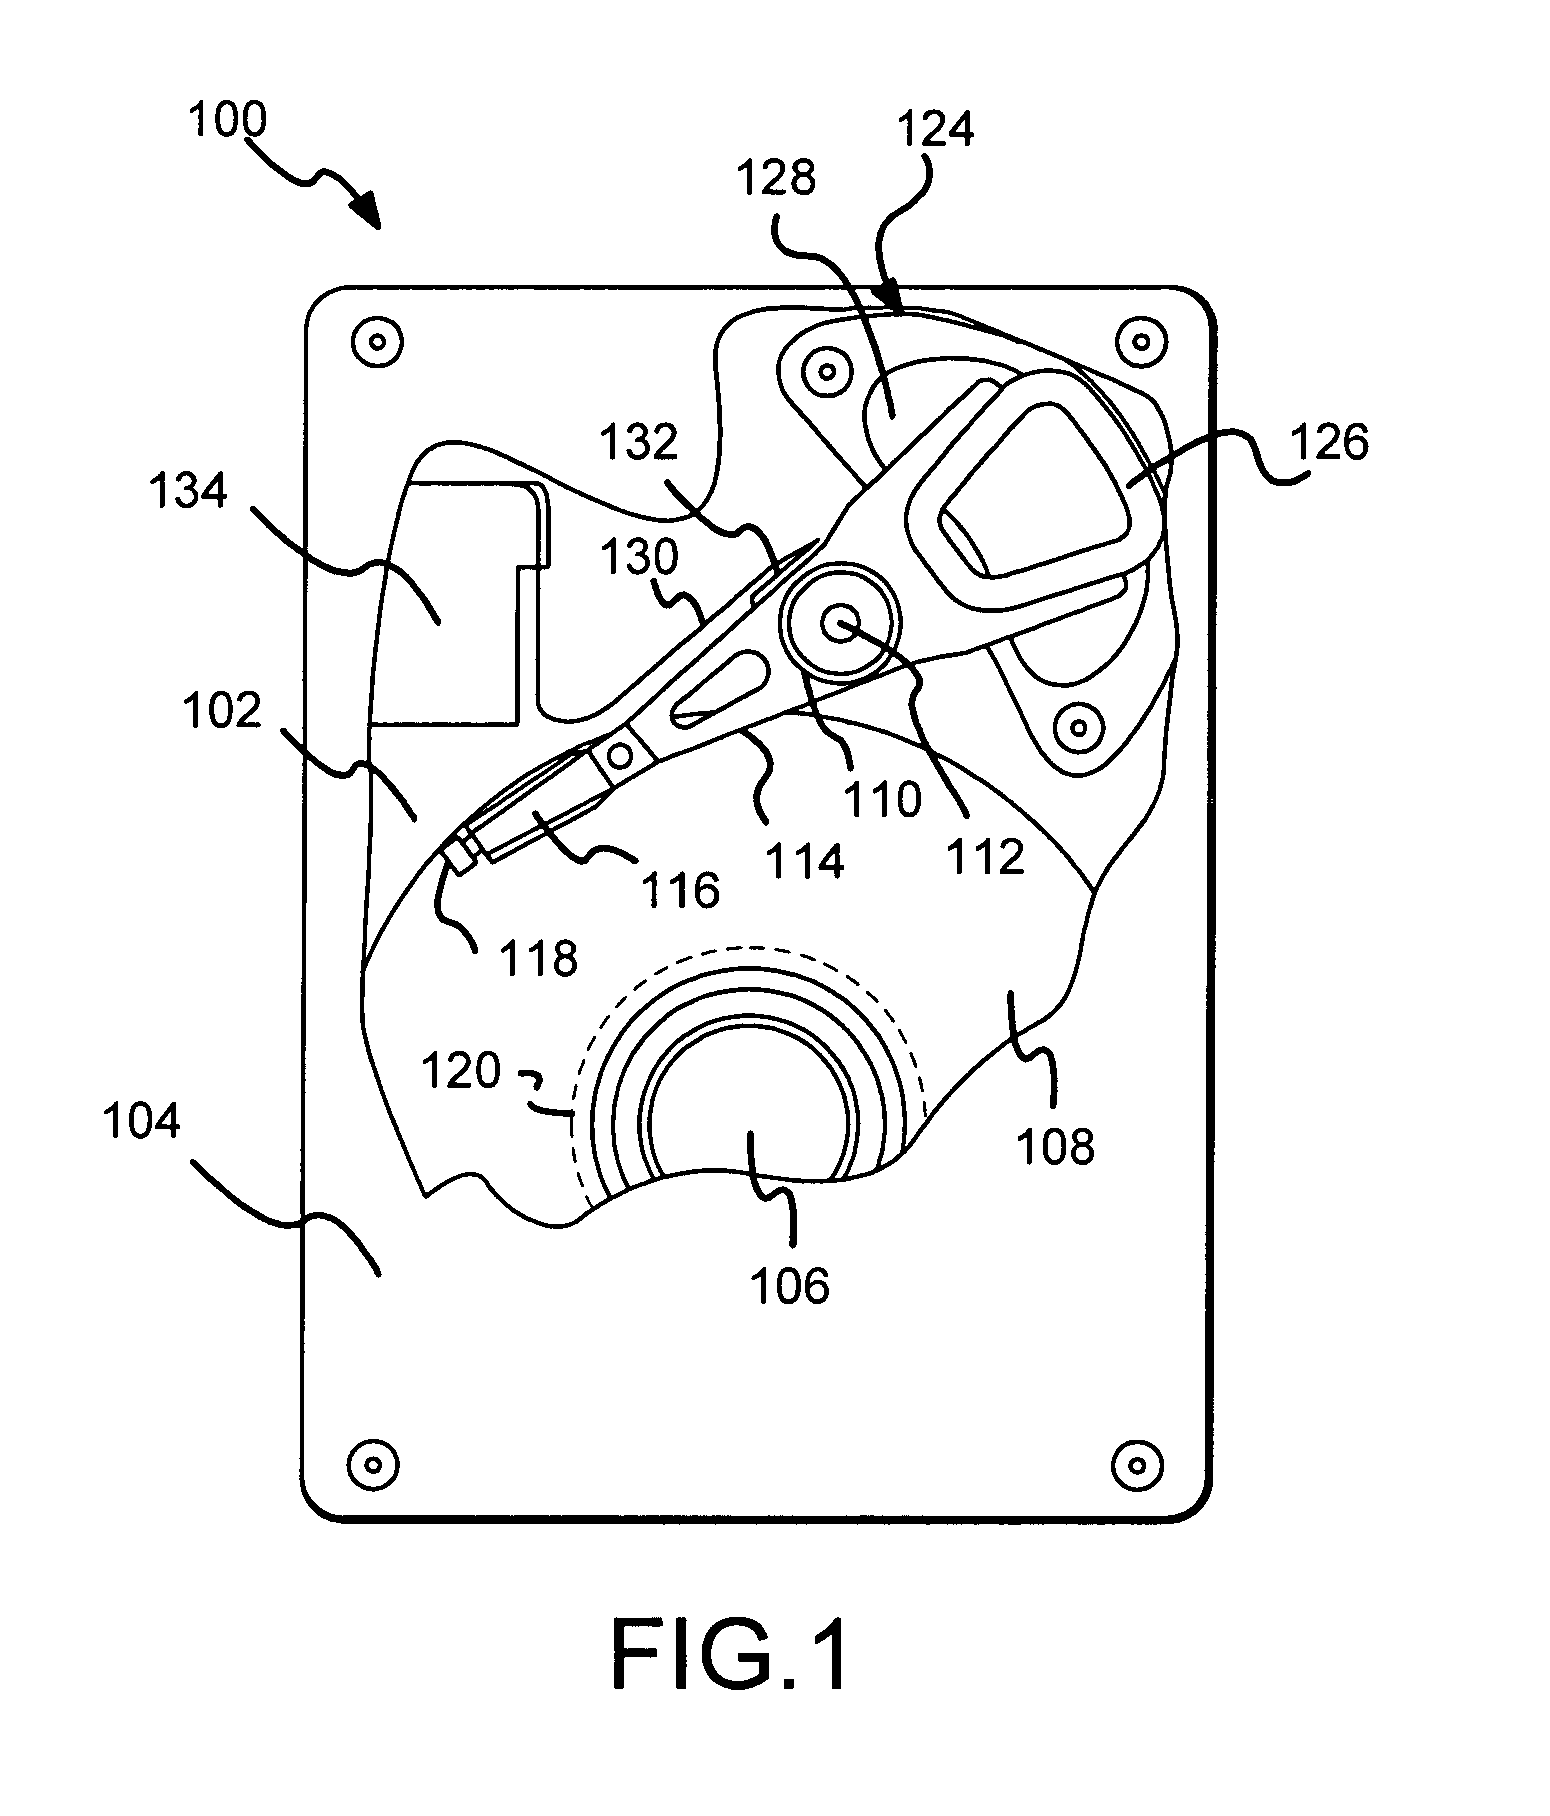 Method and apparatus for error detection